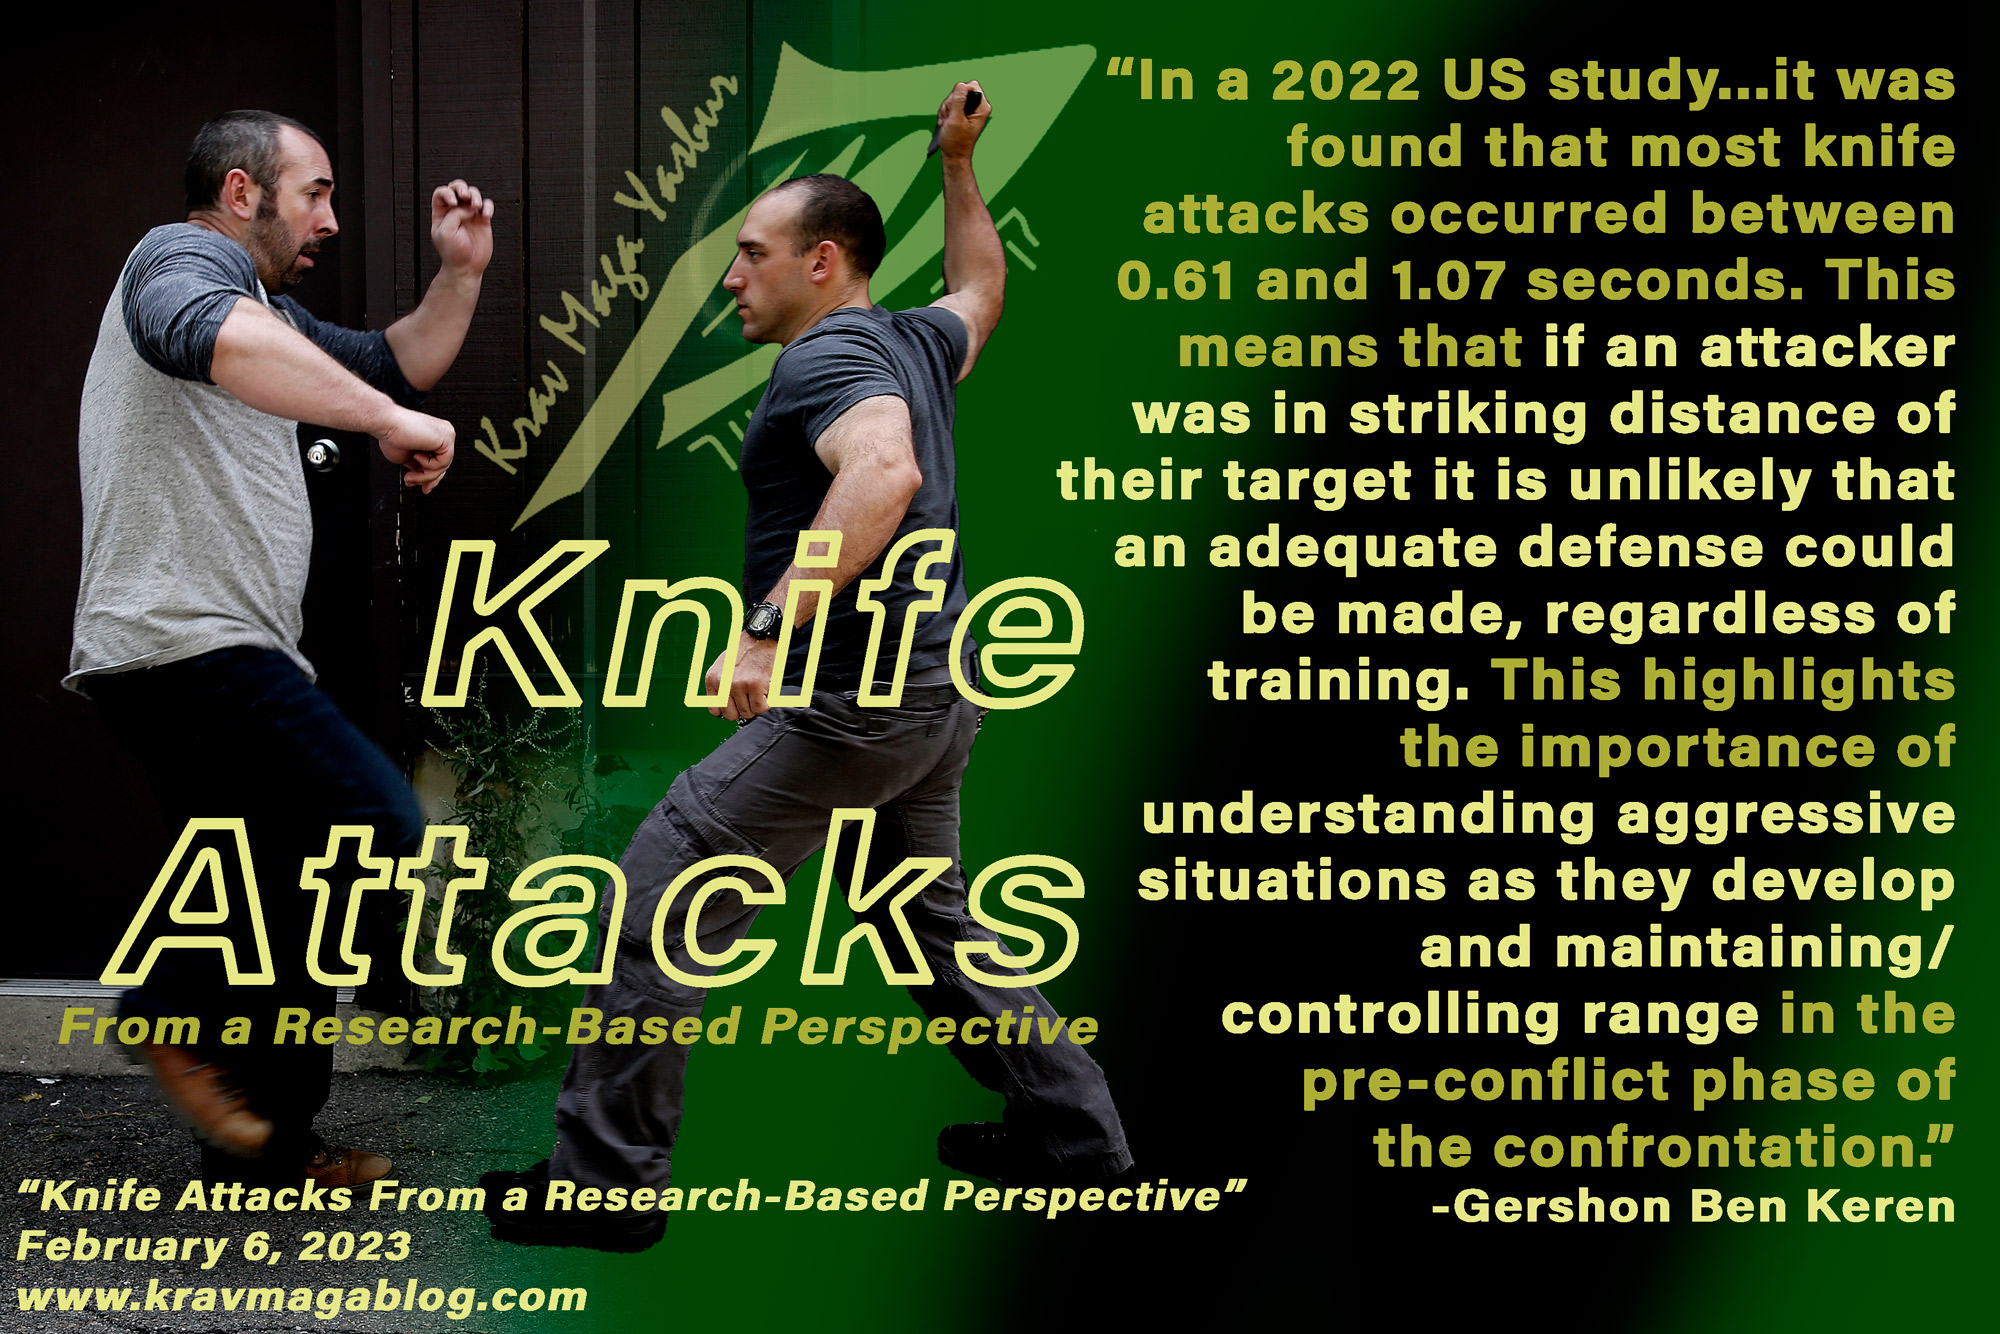 Blog About Looking At Knife Attacks From A Research-Based Perspective